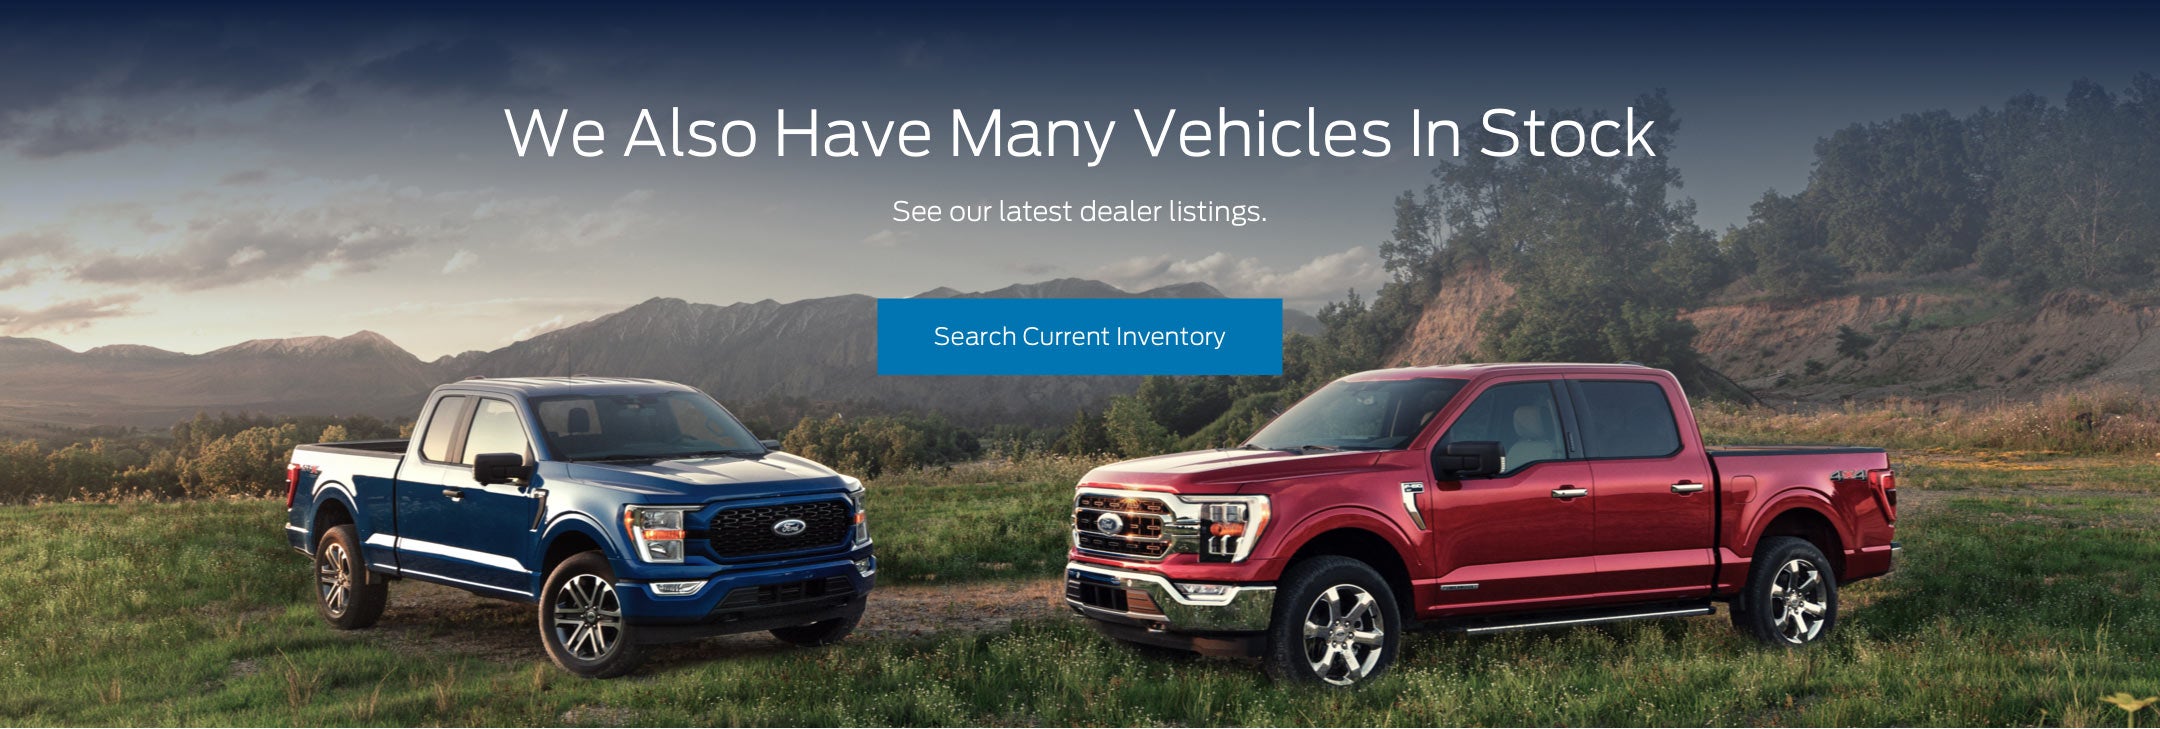 Ford vehicles in stock | Bergstrom Ford of Green Bay in Green Bay WI